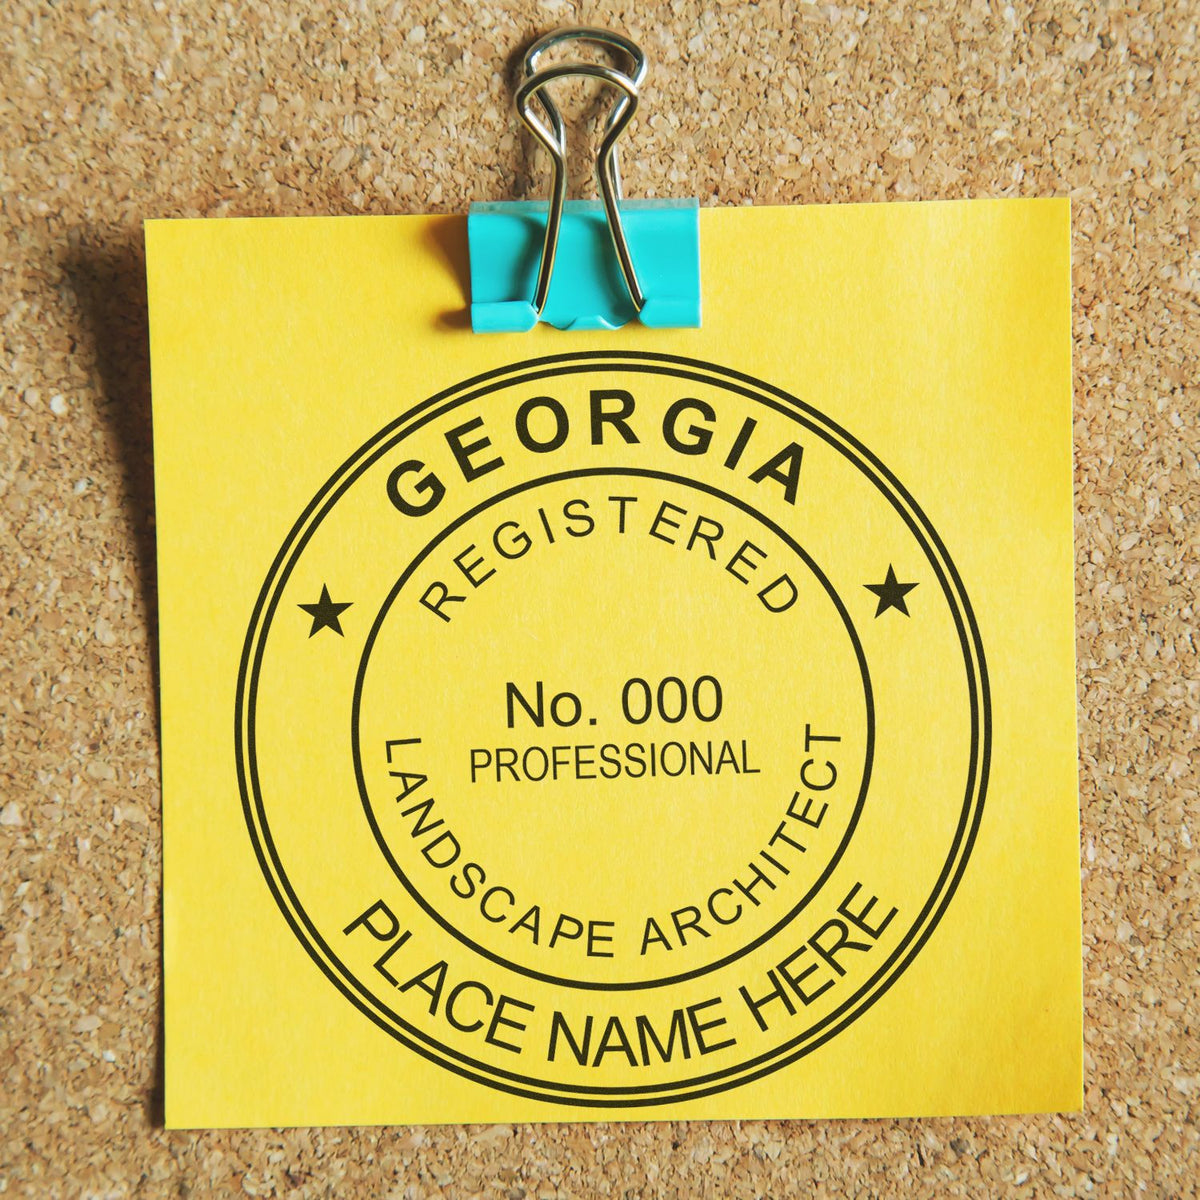 An alternative view of the Slim Pre-Inked Georgia Landscape Architect Seal Stamp stamped on a sheet of paper showing the image in use